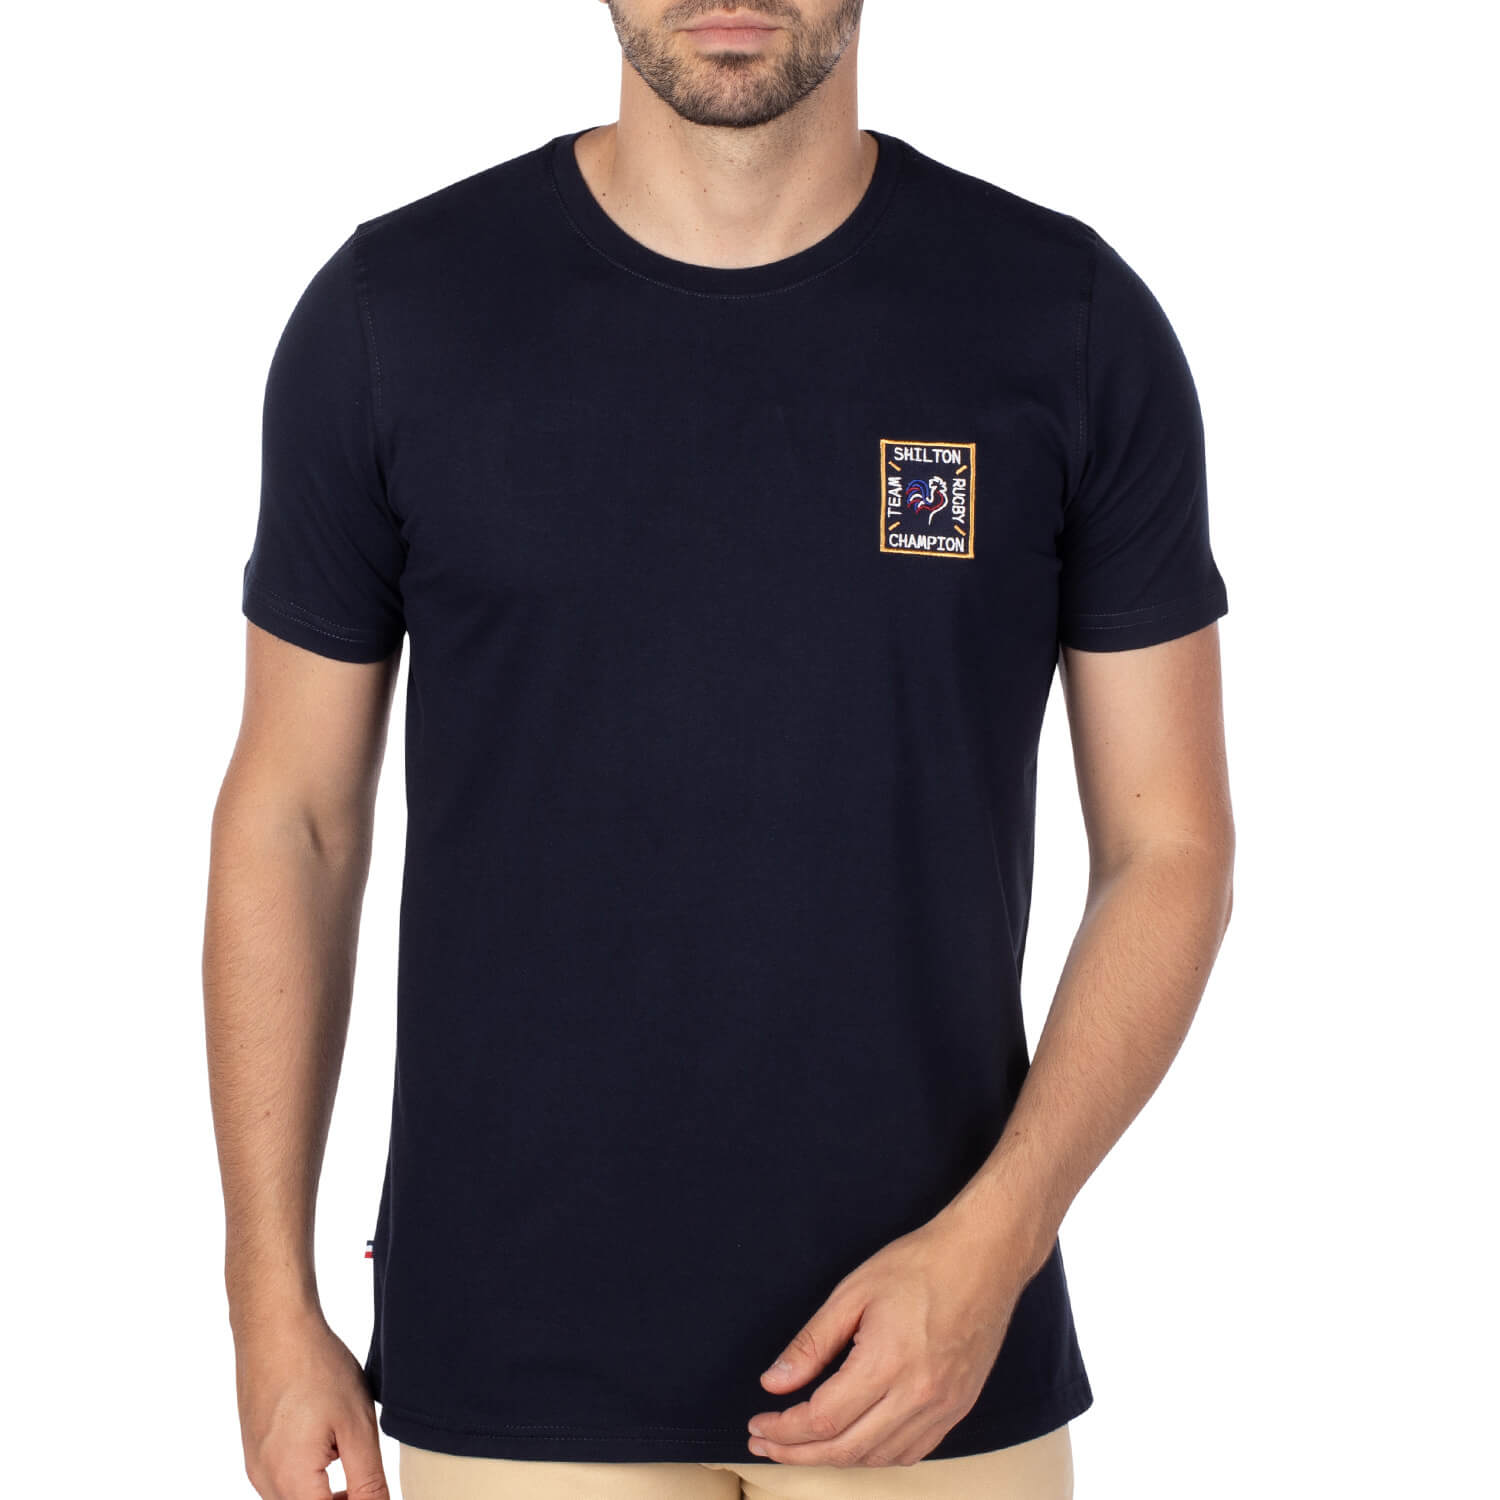 T-shirt rugby France